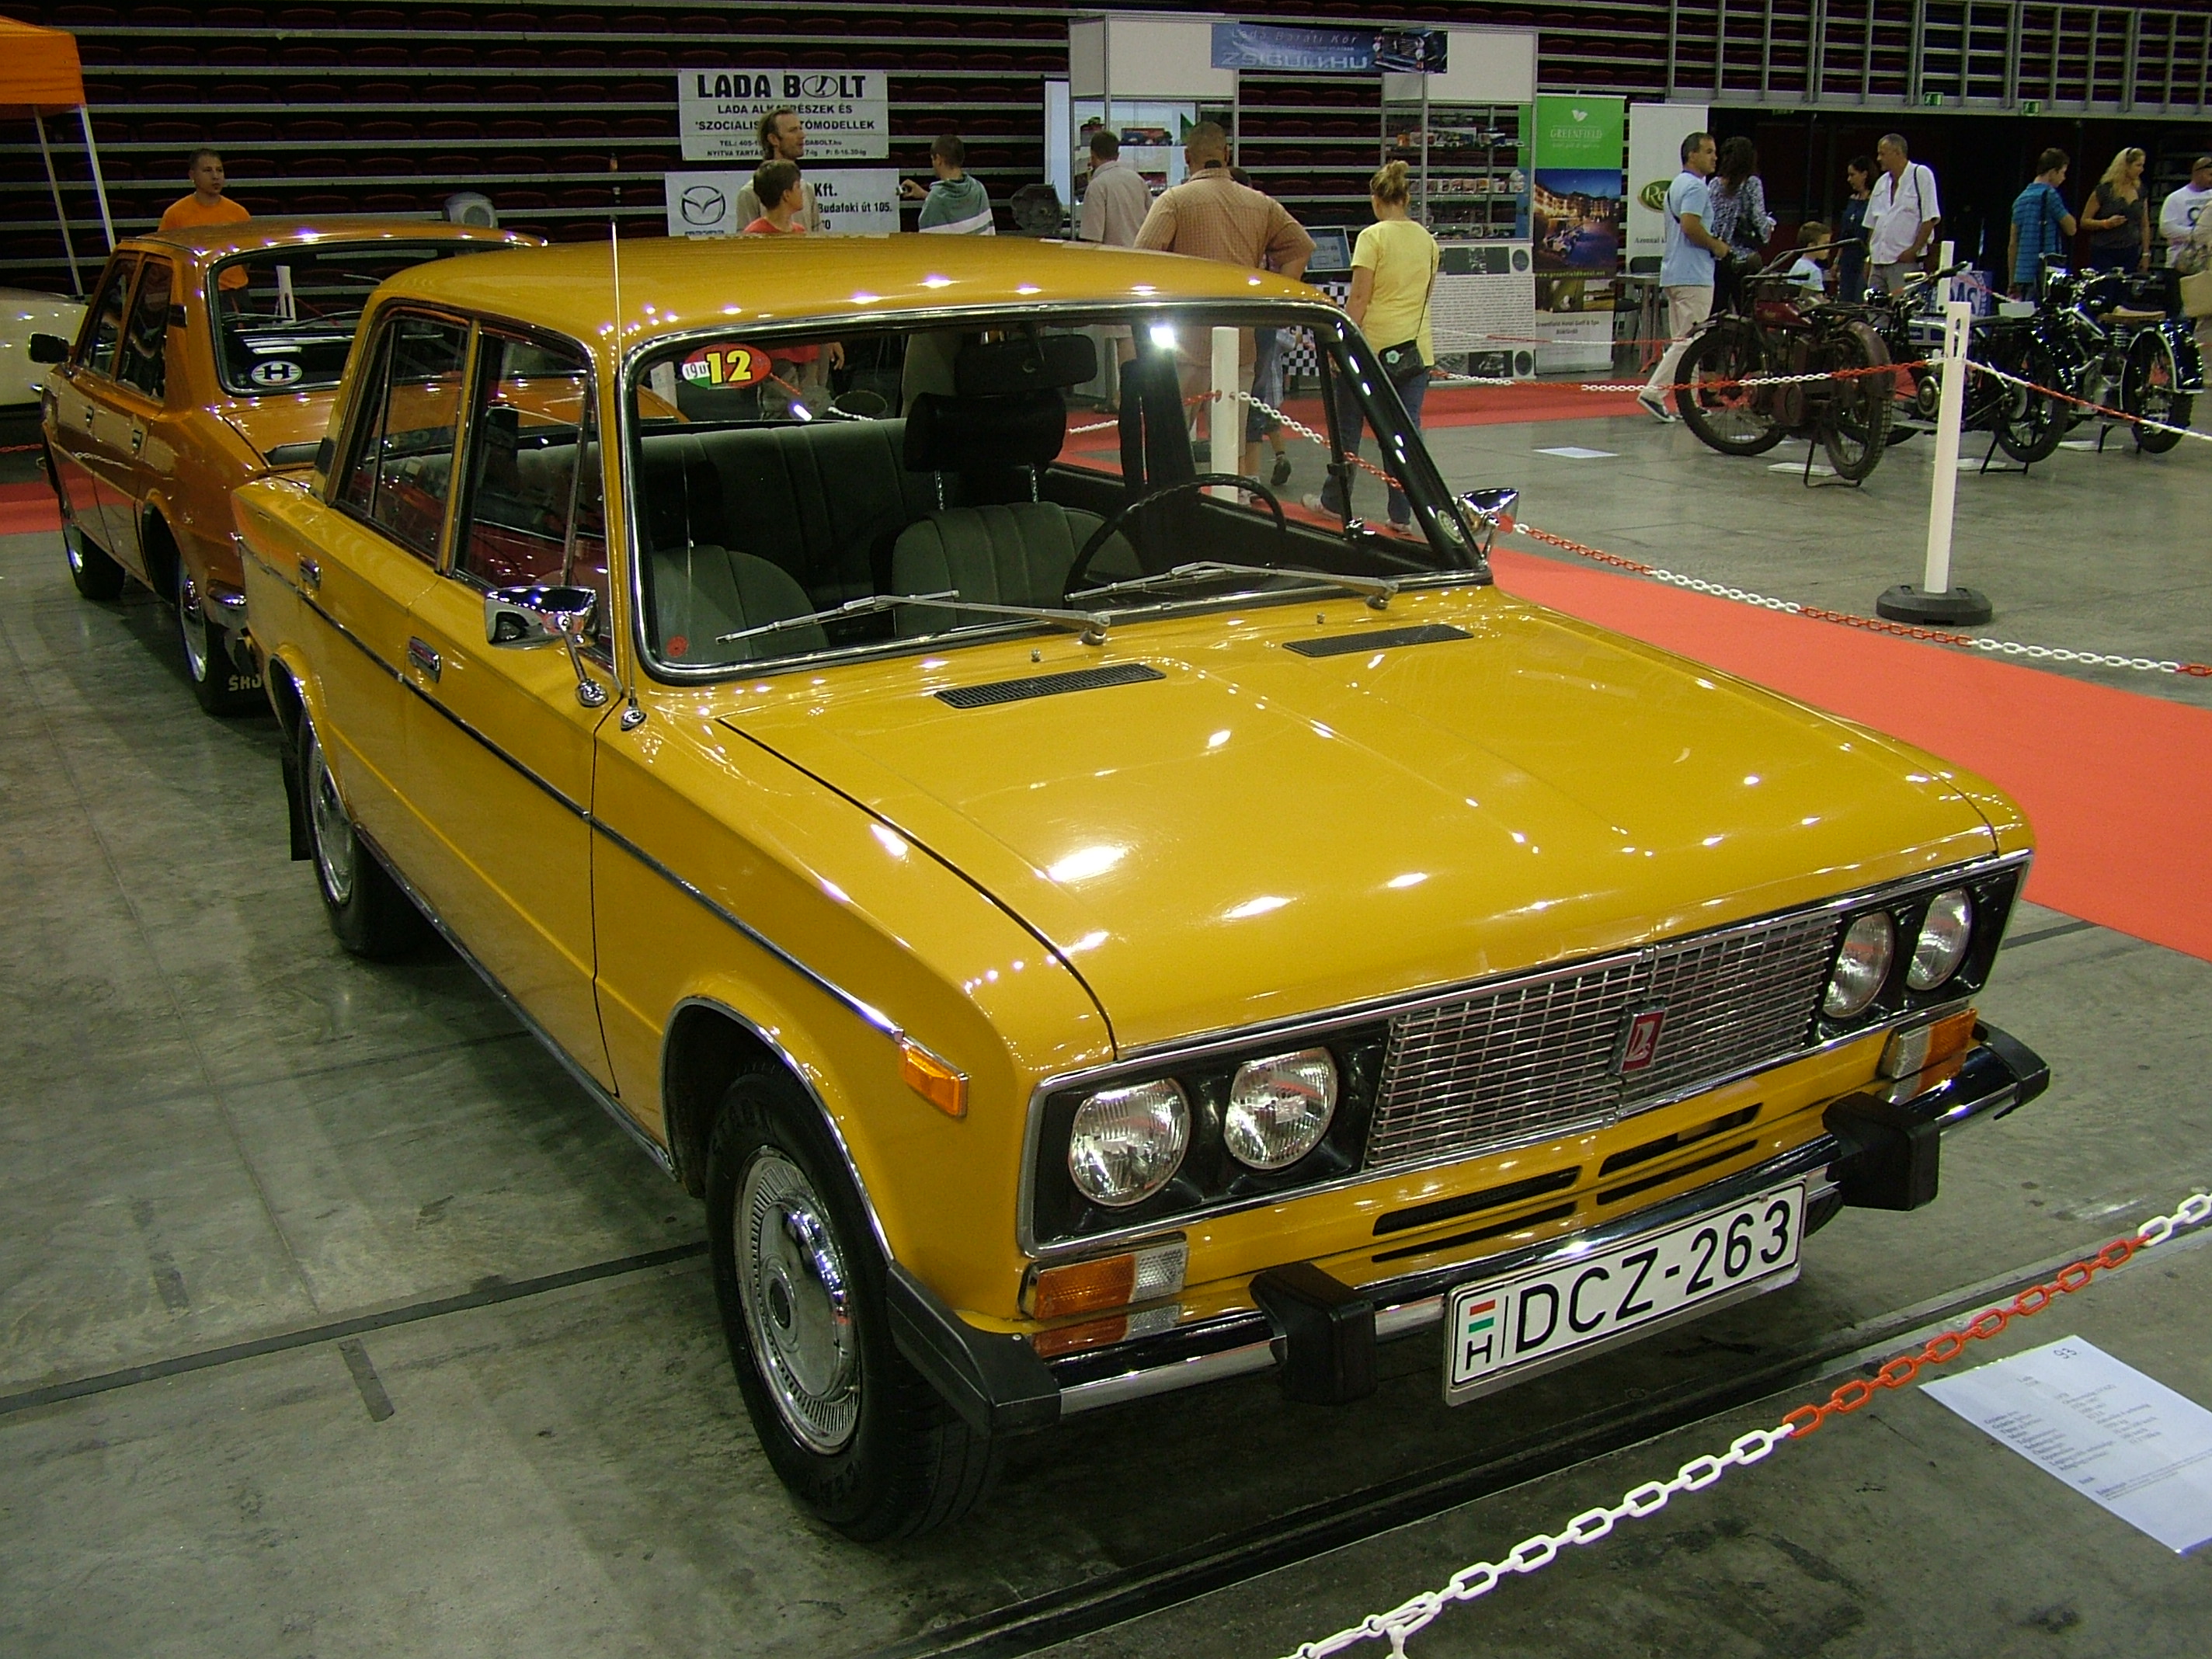 lada_1600_produced_in_1978_at_the_i_international_oldtimer_and_youngtimer_festival_budapest_2011.jpg